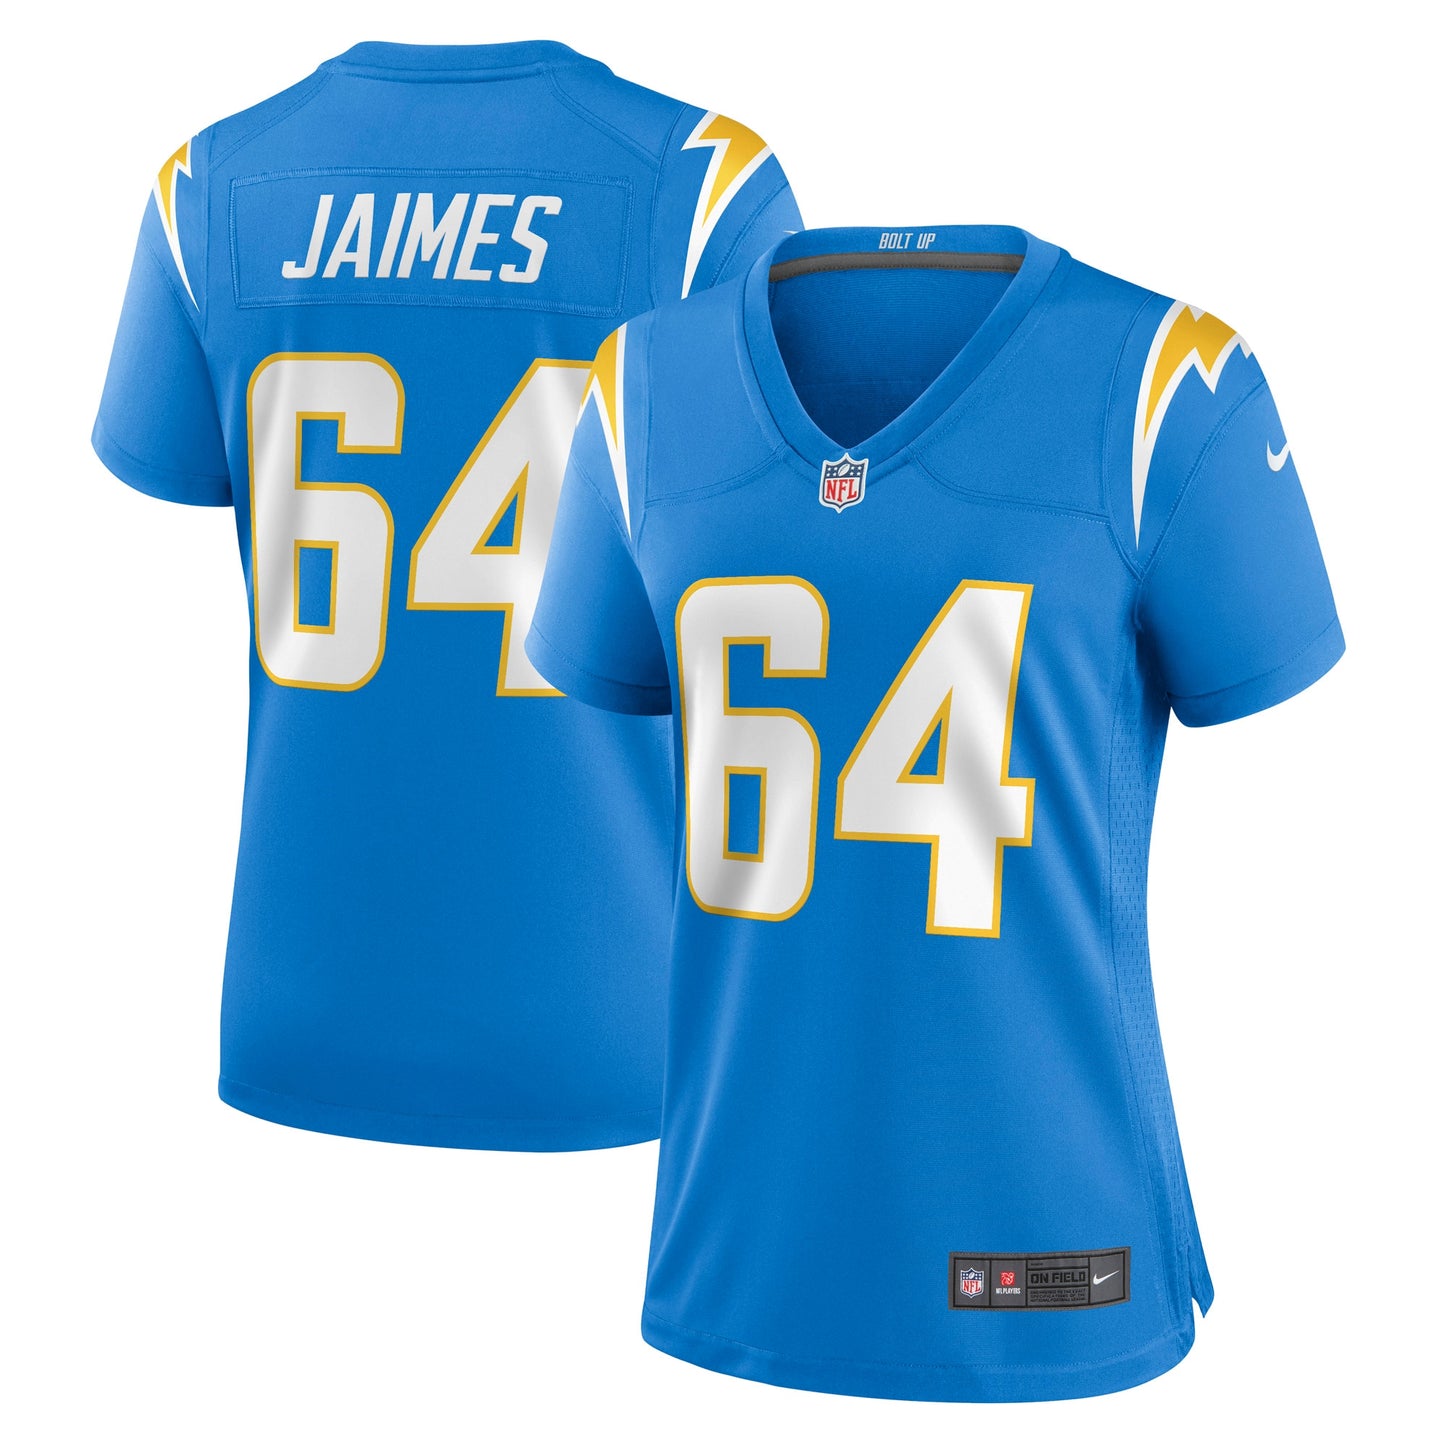 Brenden Jaimes Los Angeles Chargers Nike Women's Game Jersey - Powder Blue